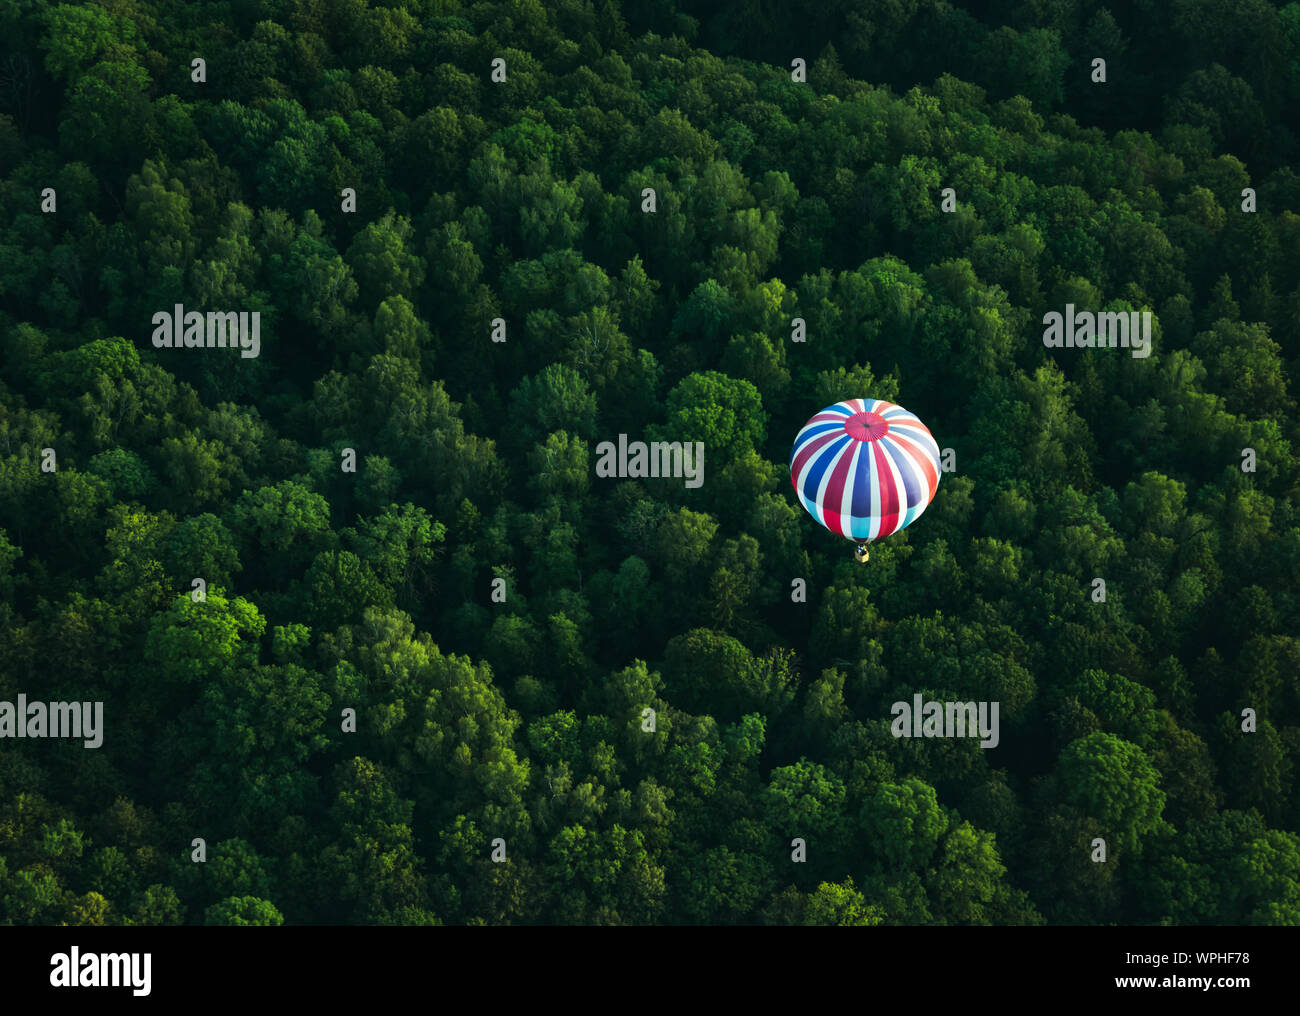 Flying hot air ballon below the forest, captured in mid summer while flying another hot air balloon. Stock Photo